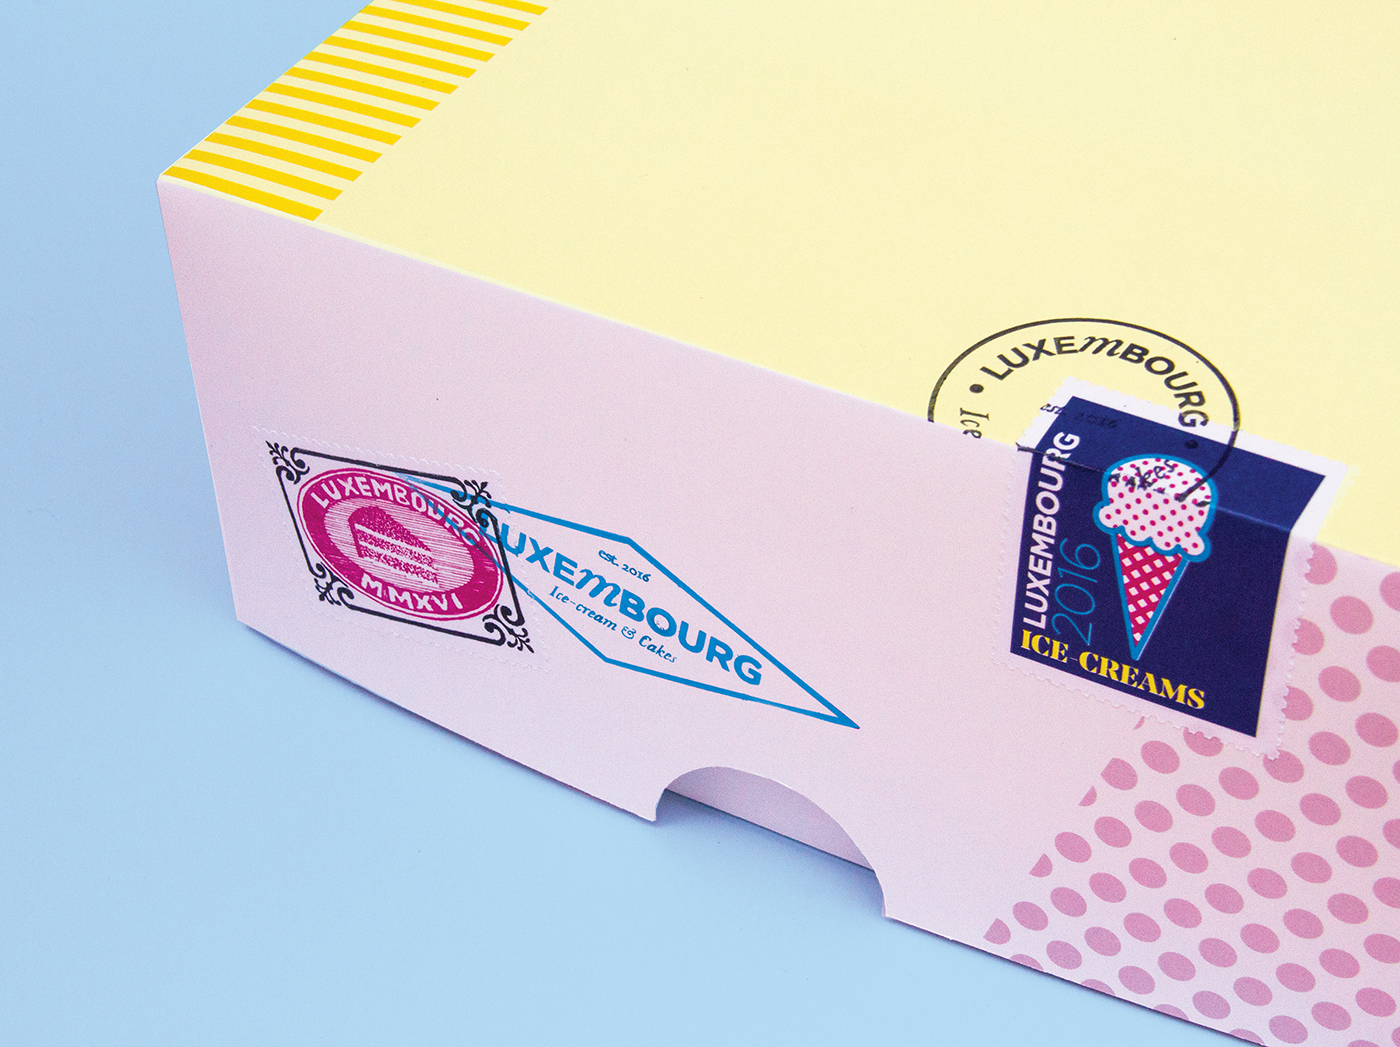 Packaging ice-cream cakes stamp poster visual identity Sweets